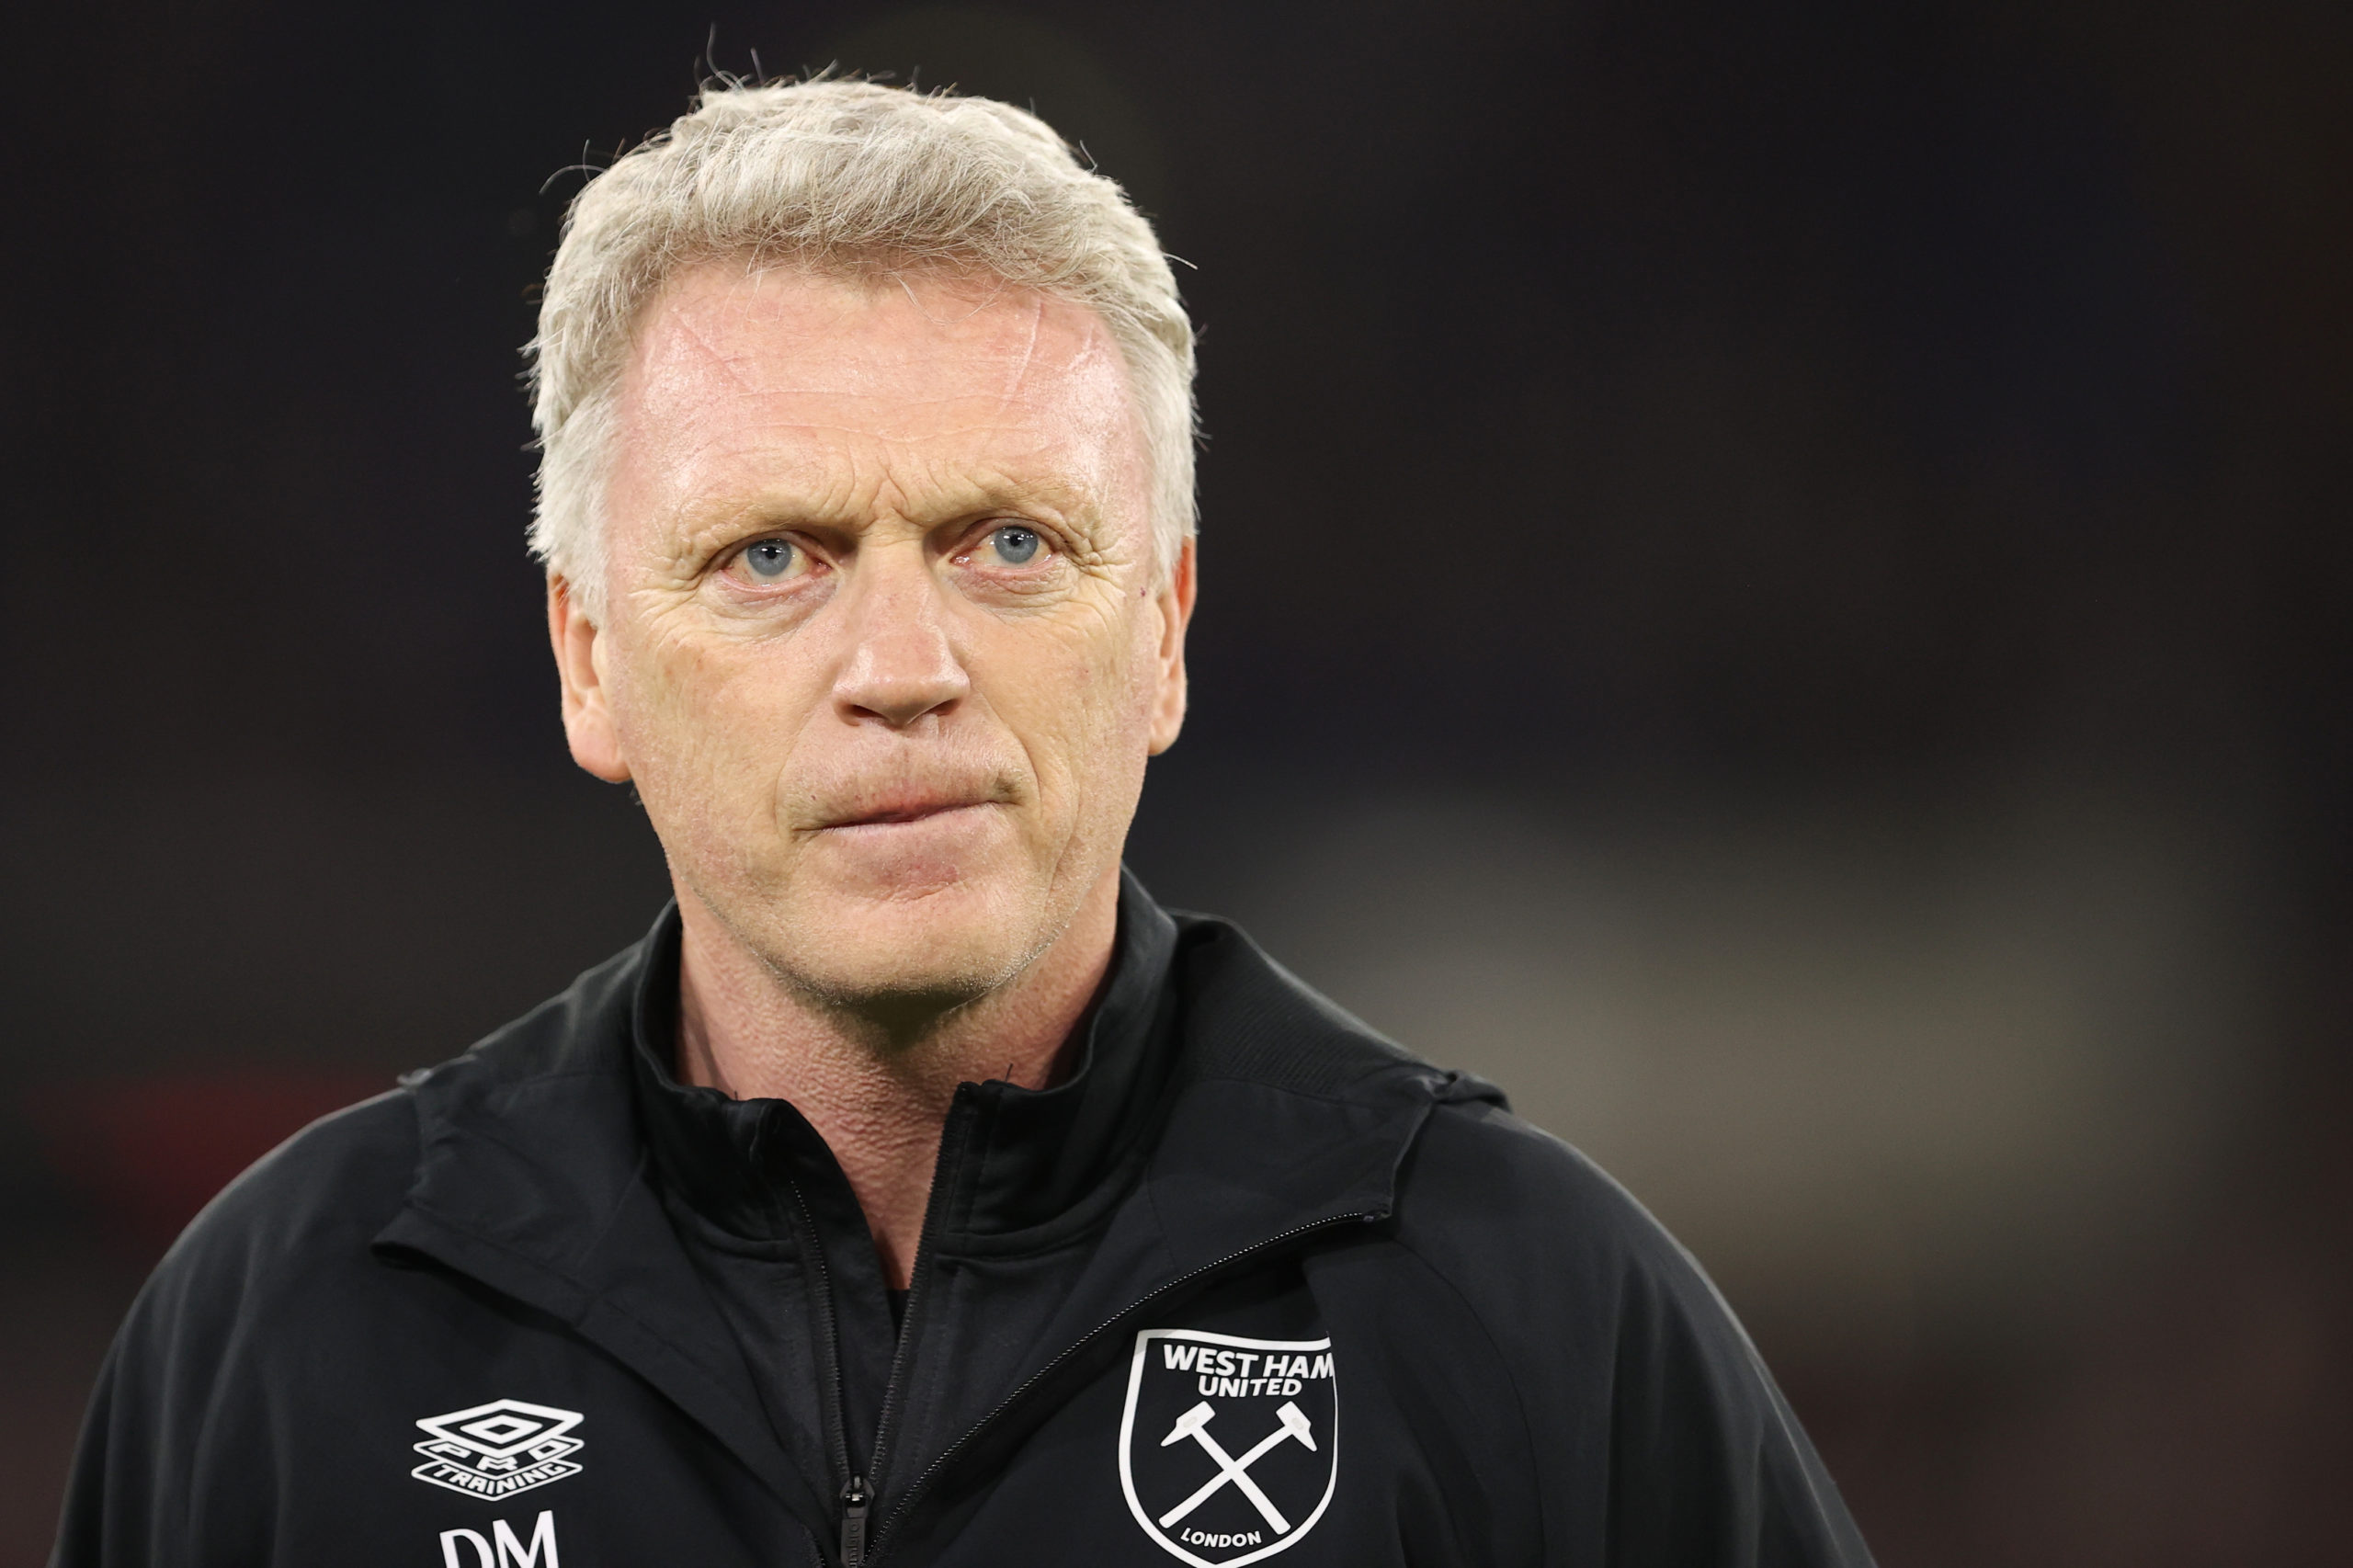 David Moyes facing massive West Ham selection headache for Everton as he weighs up risk factor